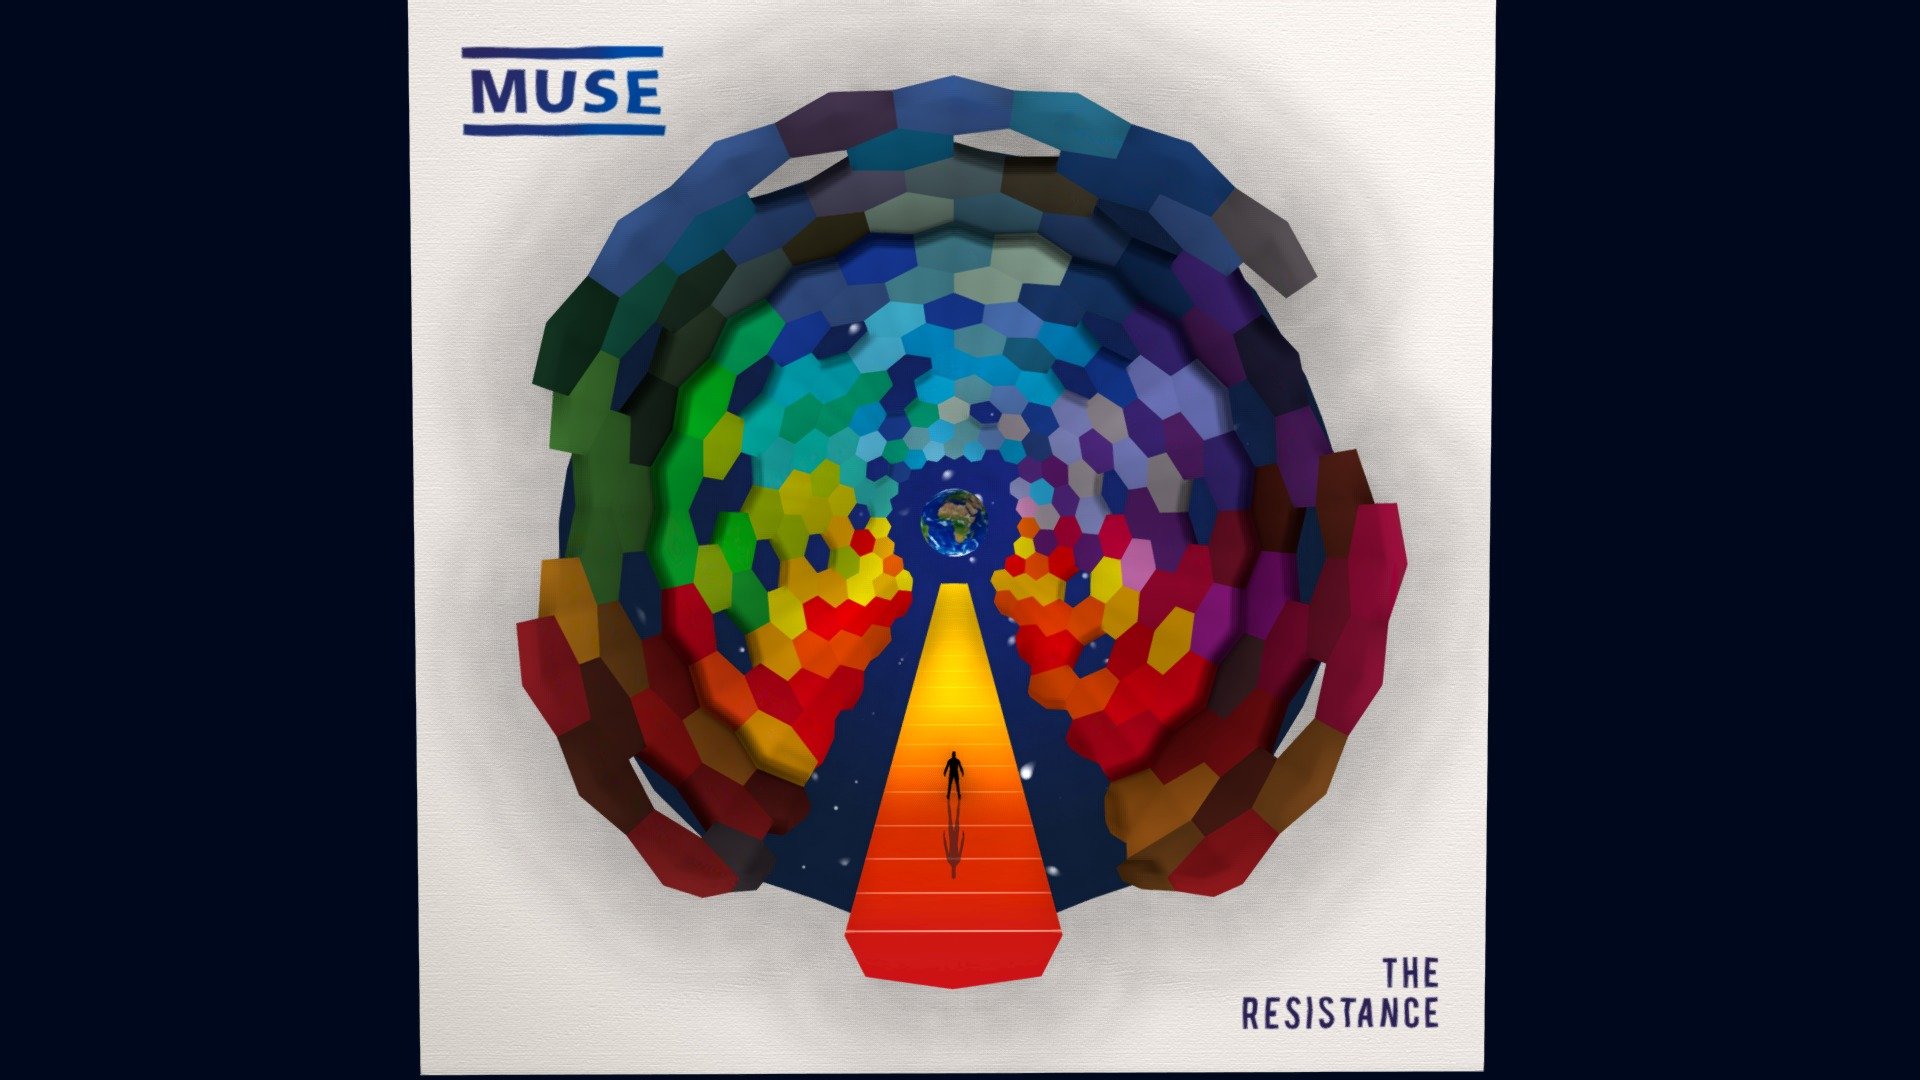 Muse undisclosed desires. Muse the Resistance обложка альбома. Muse Exogenesis Resistance. Muse альбом 2009. The Muse 'Resistance' album Cover.